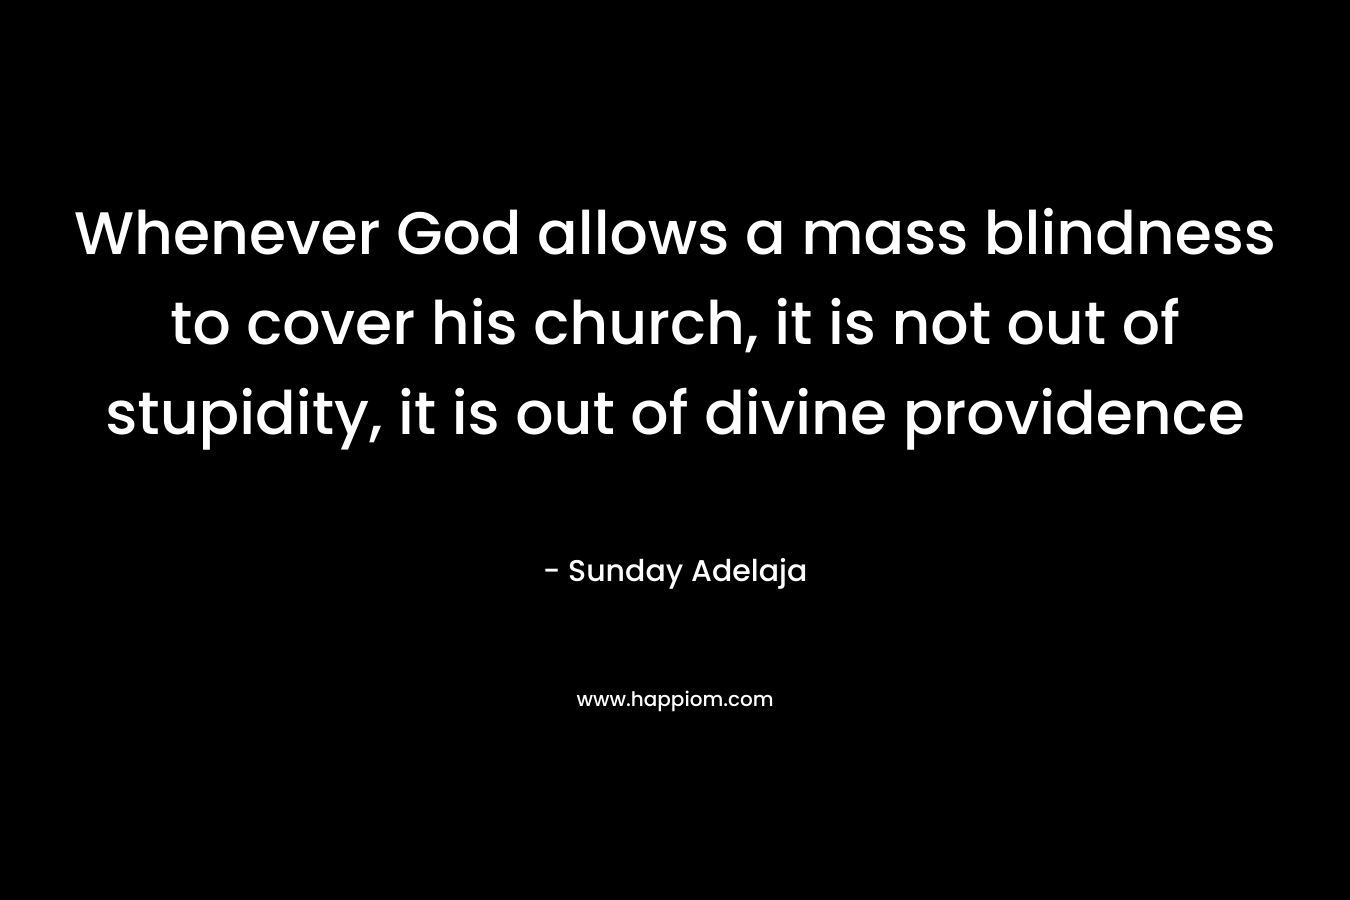 Whenever God allows a mass blindness to cover his church, it is not out of stupidity, it is out of divine providence – Sunday Adelaja